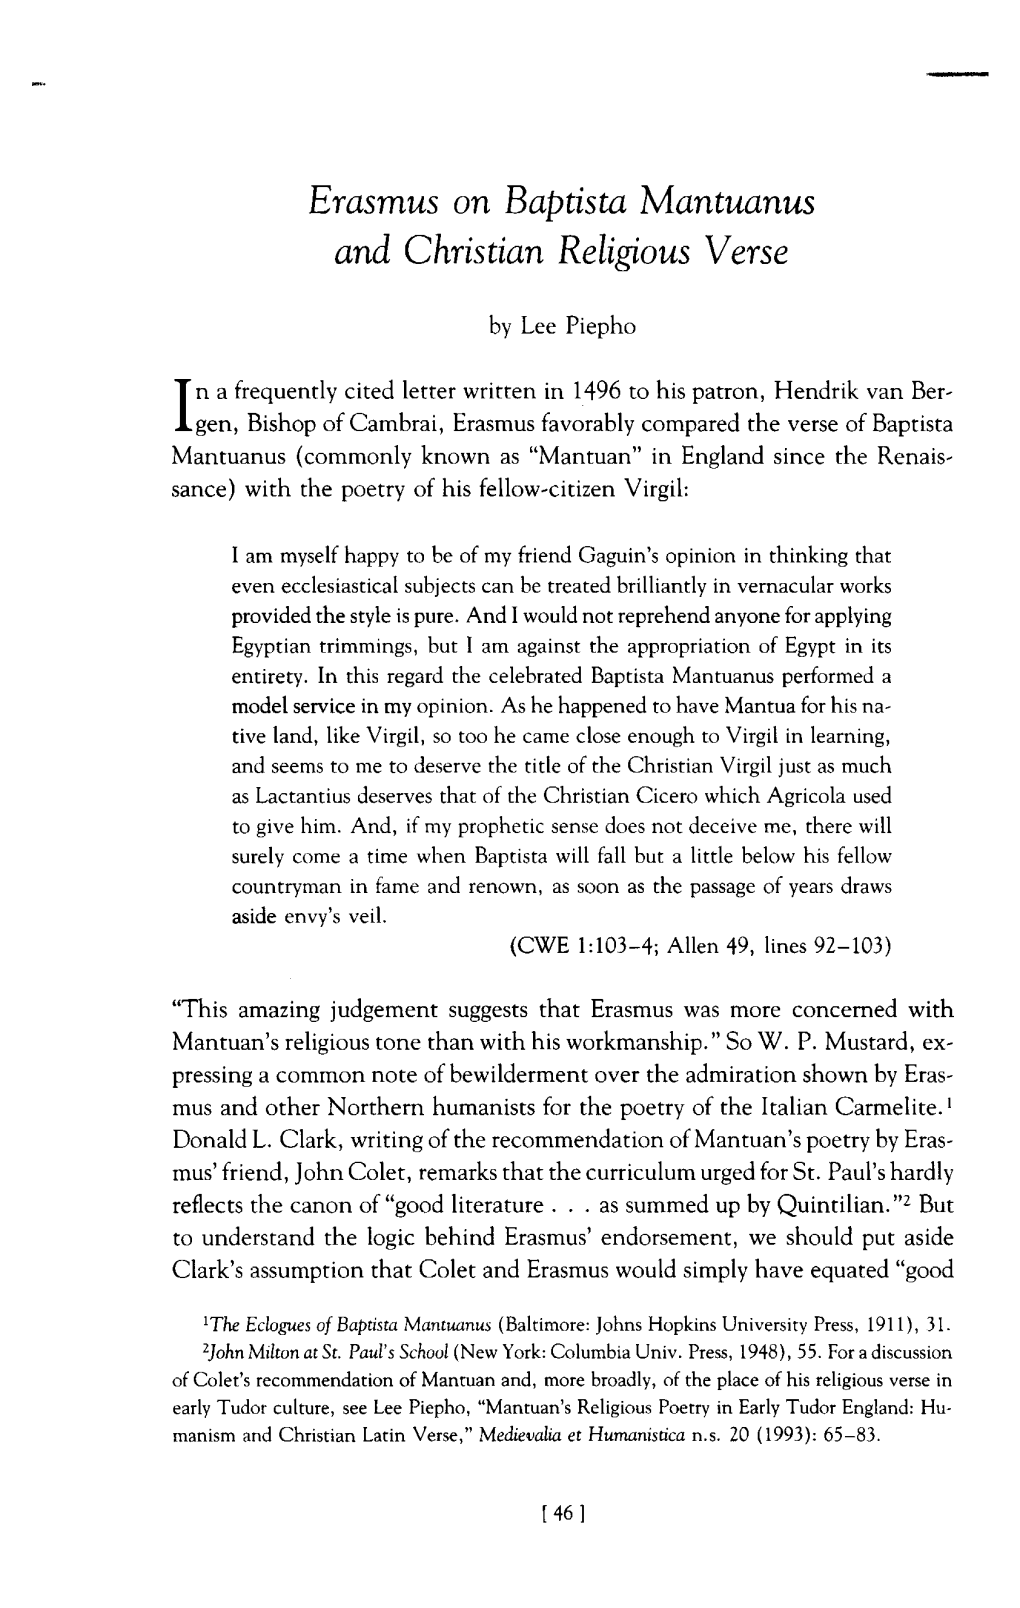 Erasmus on Baptista Mantuanus and Christian Religious Verse by Lee Piepho in a Frequently Cited Letter Written in 1496 to H